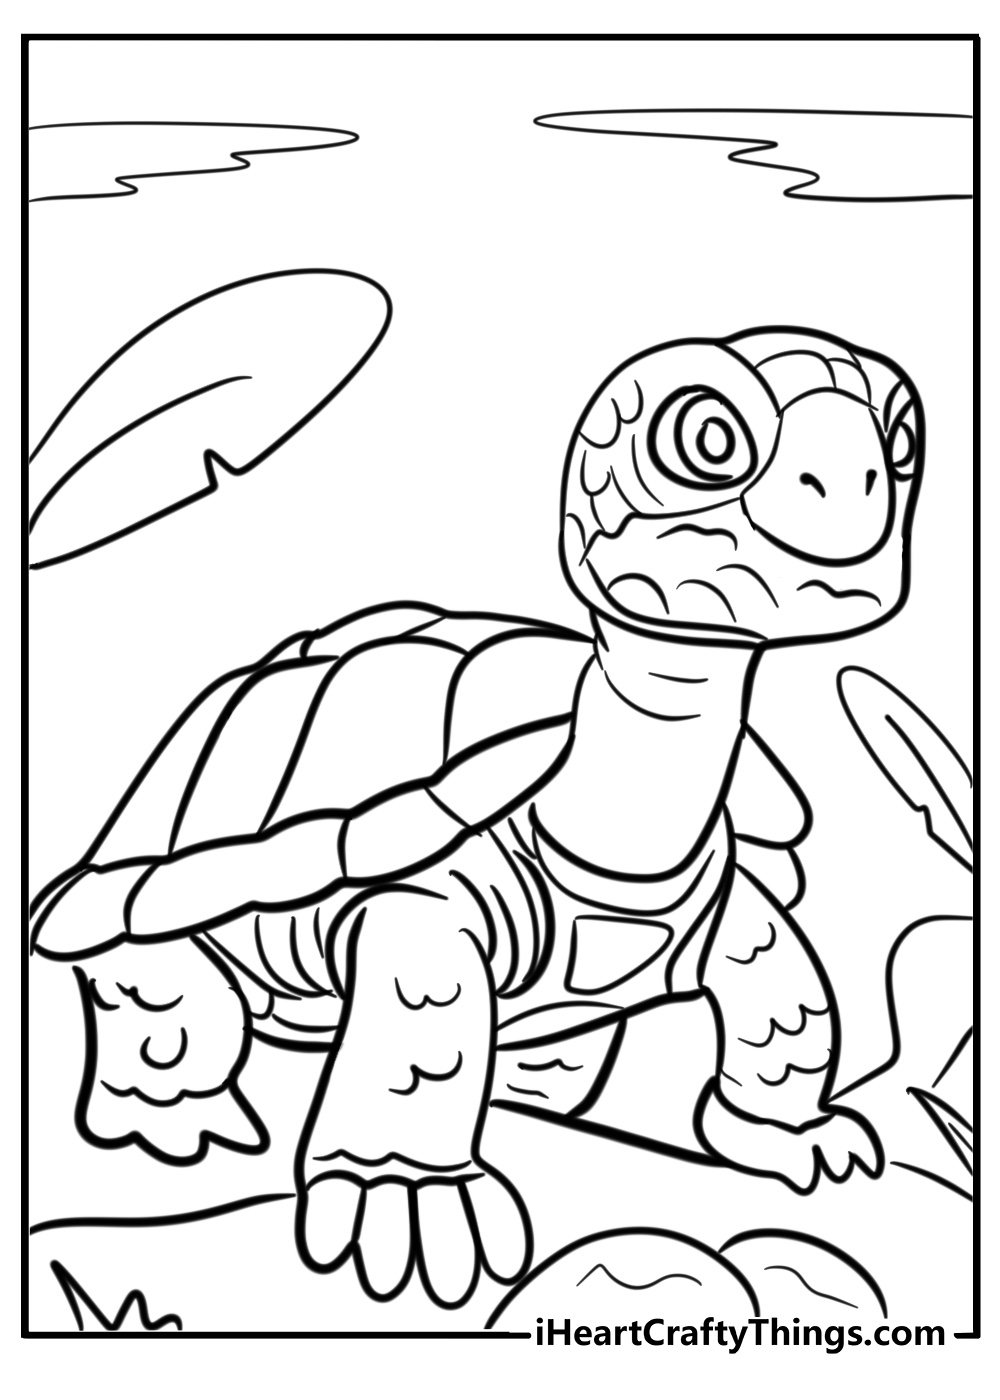 Simple outline of turtle to color for kids